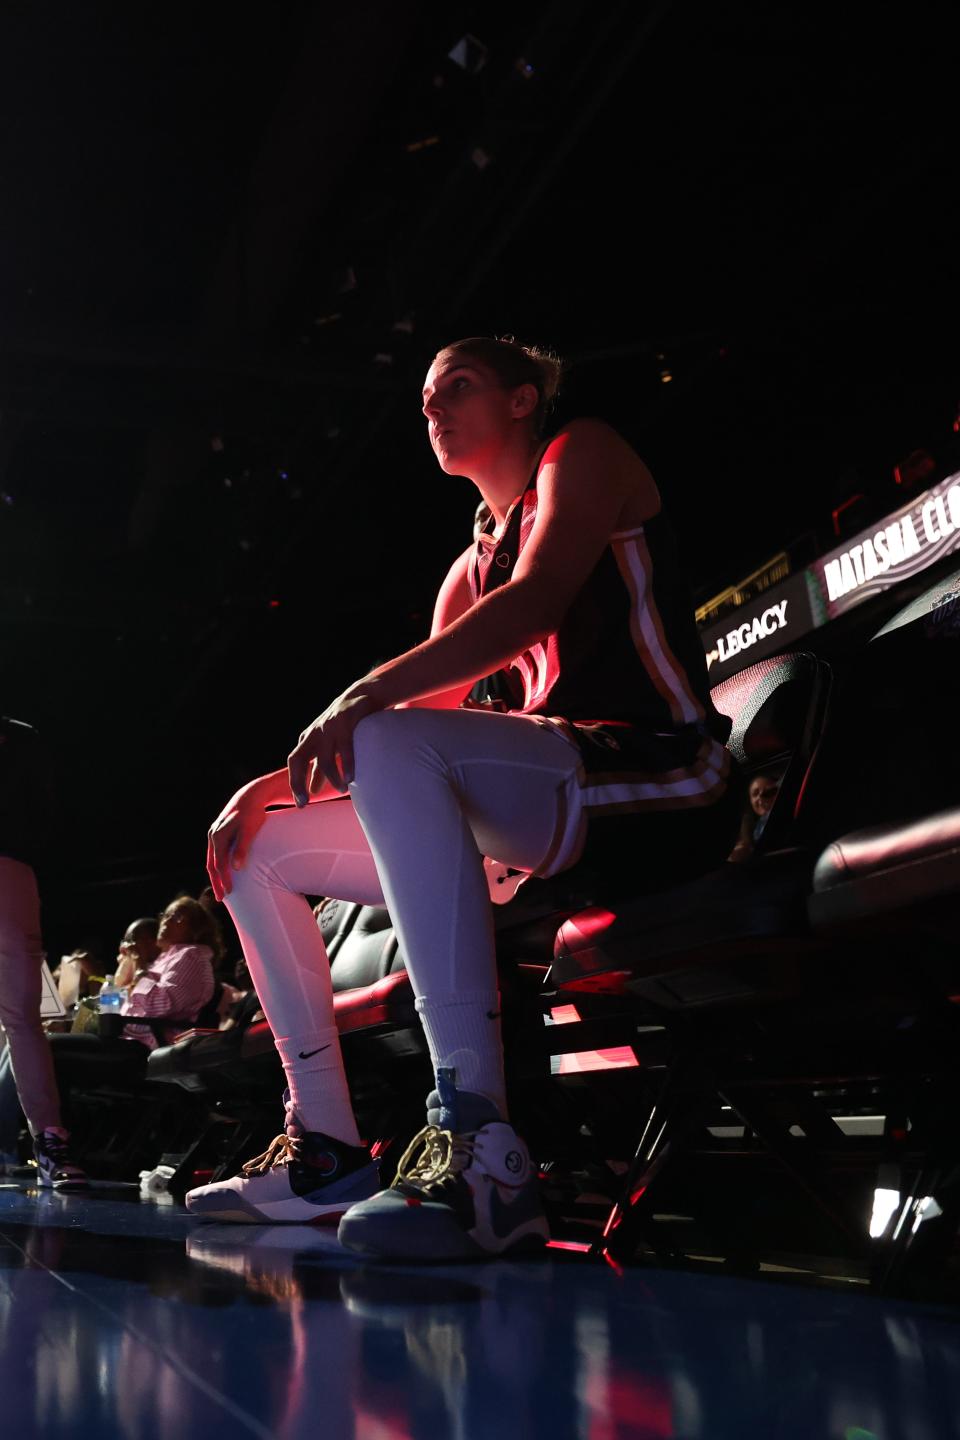 Elena Delle Donne of the Washington Mystics sits on the bench as she waits to be introduced before playing against the Connecticut Sun at Entertainment & Sports Arena on May 23, 2023 in Washington, D.C.